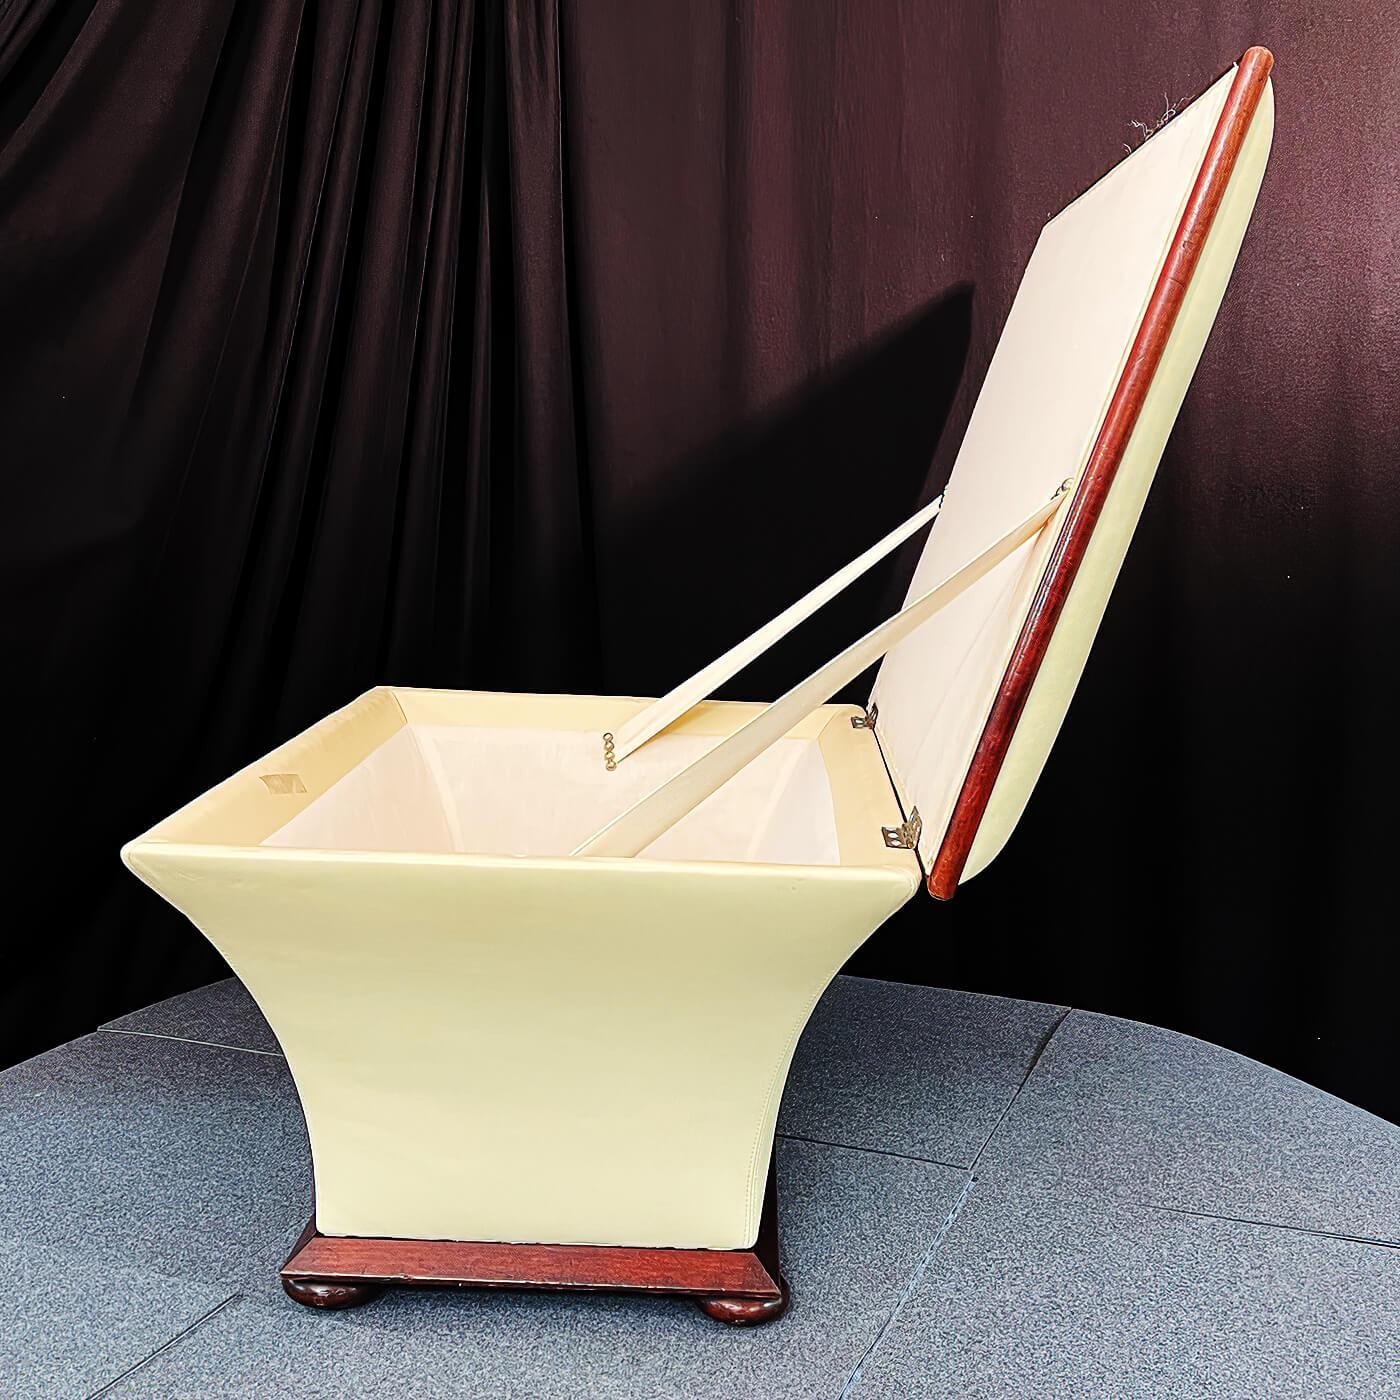 A Hollywood Regency style cream leather upholstered sarcophagus form bench with a lift top and interior storage compartment, with wood trim and base and raised on flattened bun feet. circa 1950

Dimensions: 31